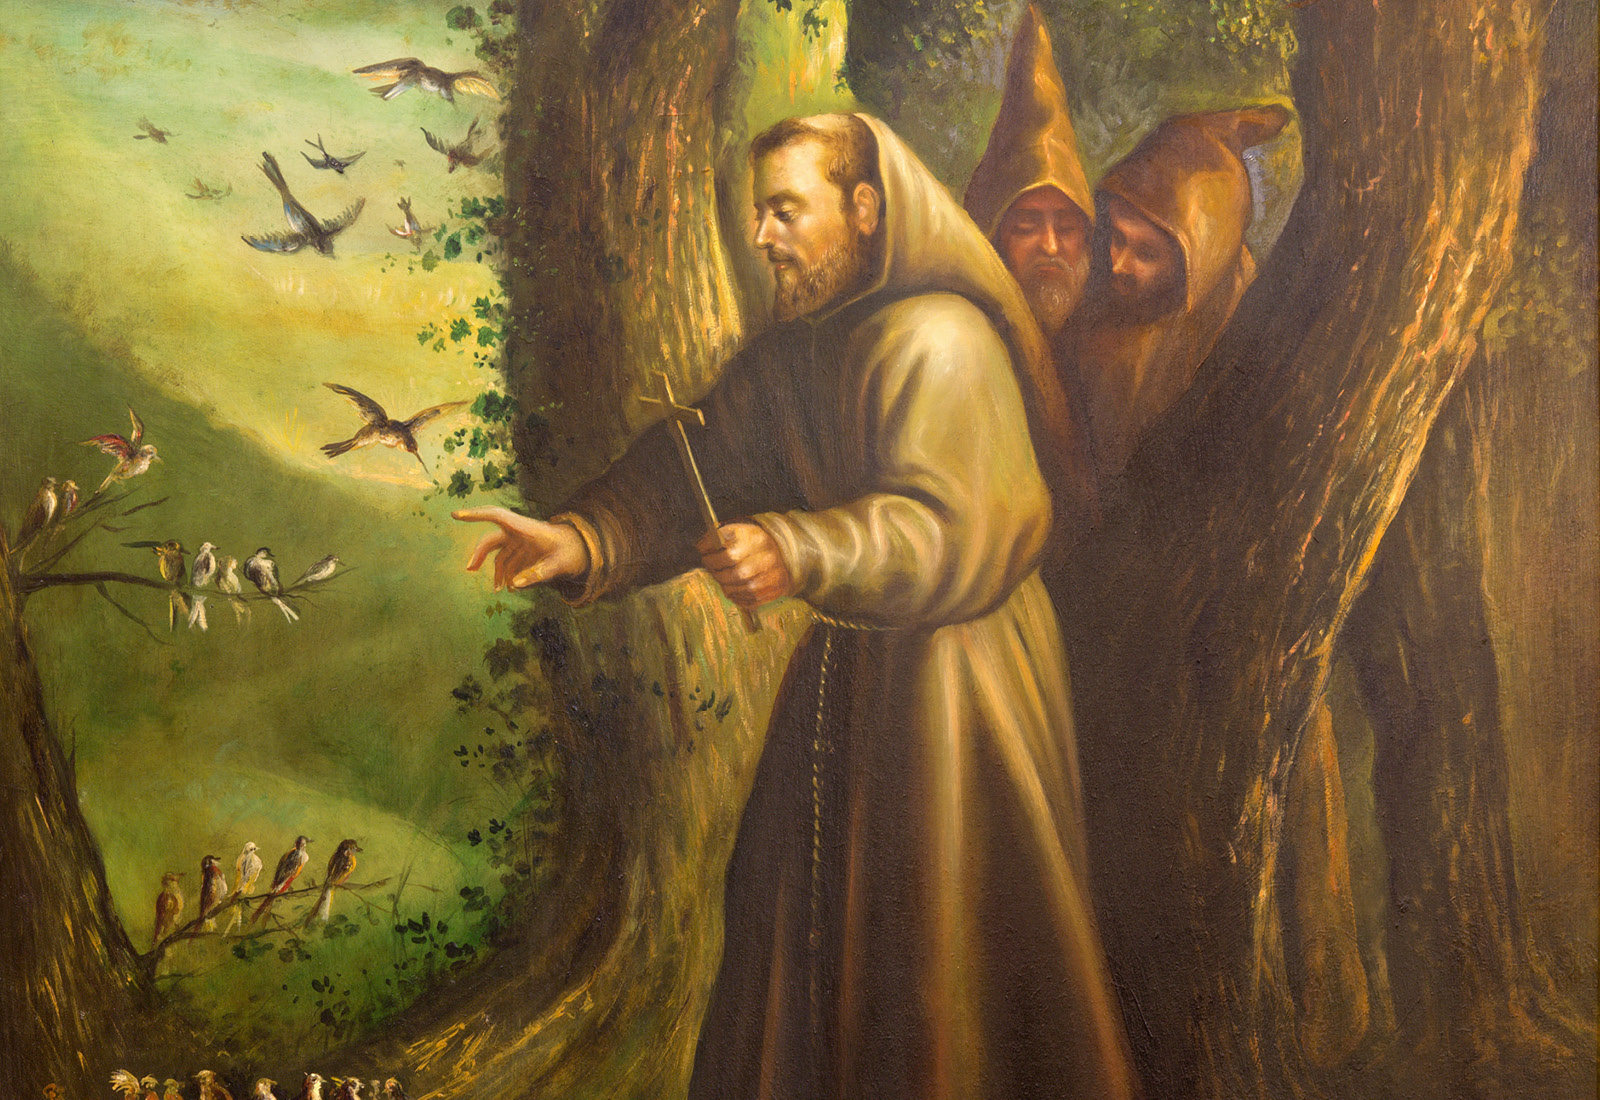 St. Francis of Assisi: Blessing of the Animals | Focus LGBT+ Magazine